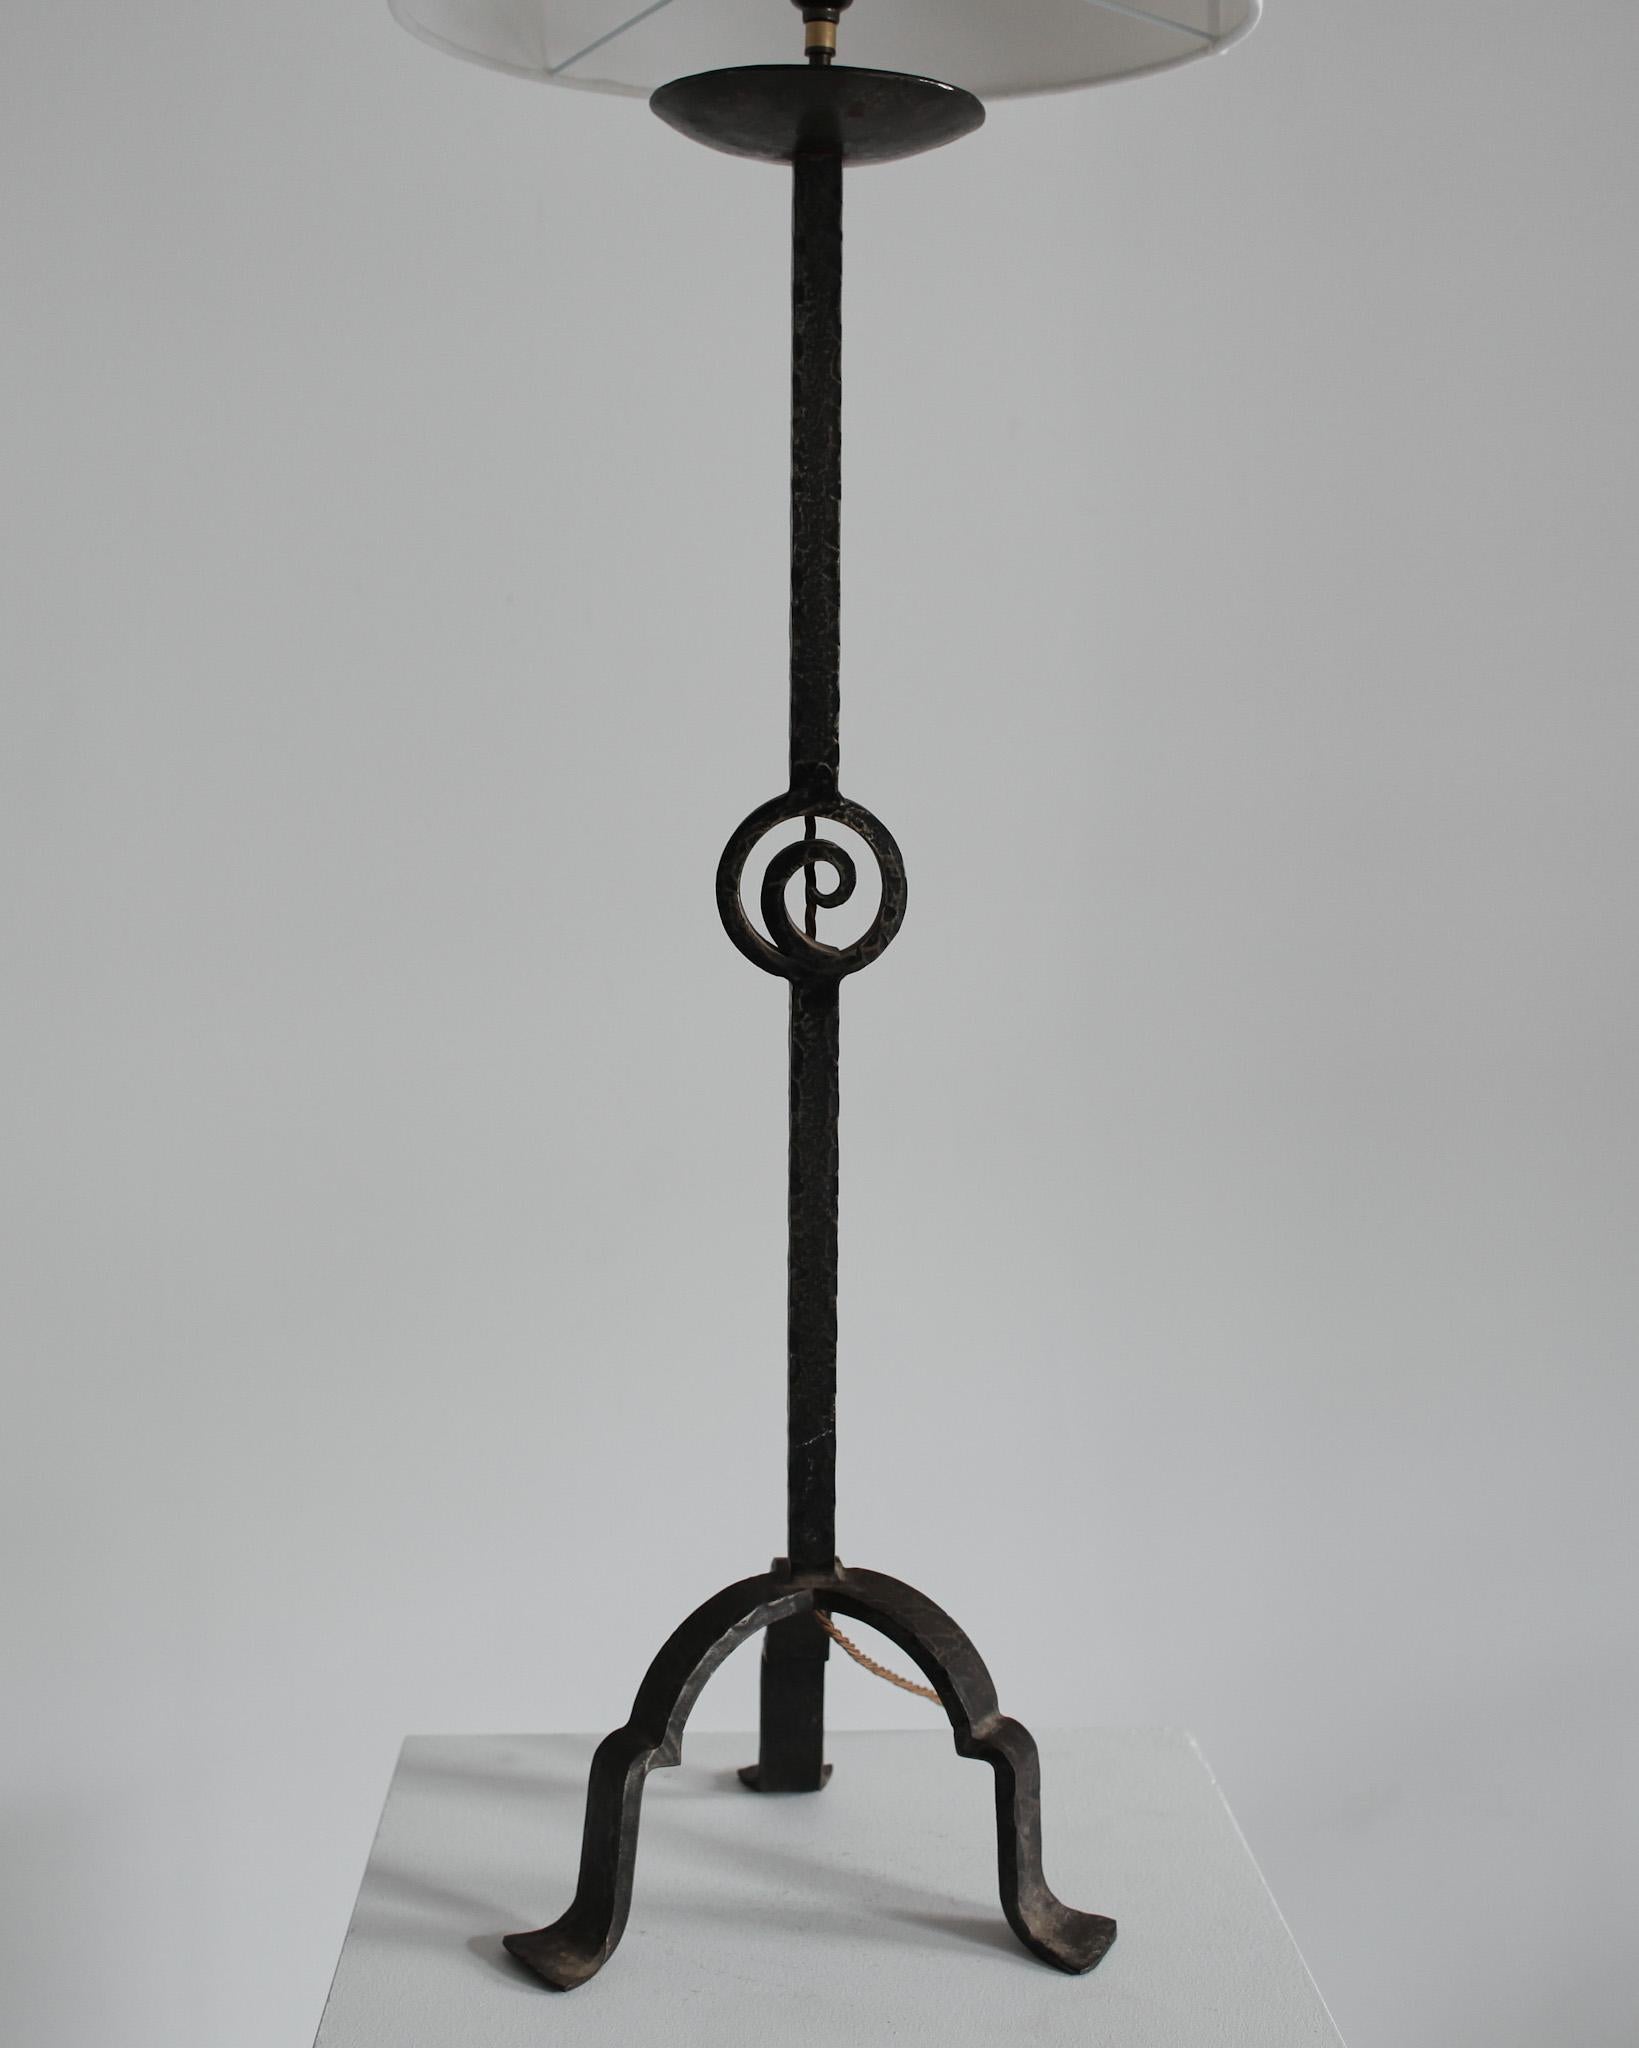 Mid-20th Century Midcentury French Modernist Wrought Iron Lamp For Sale